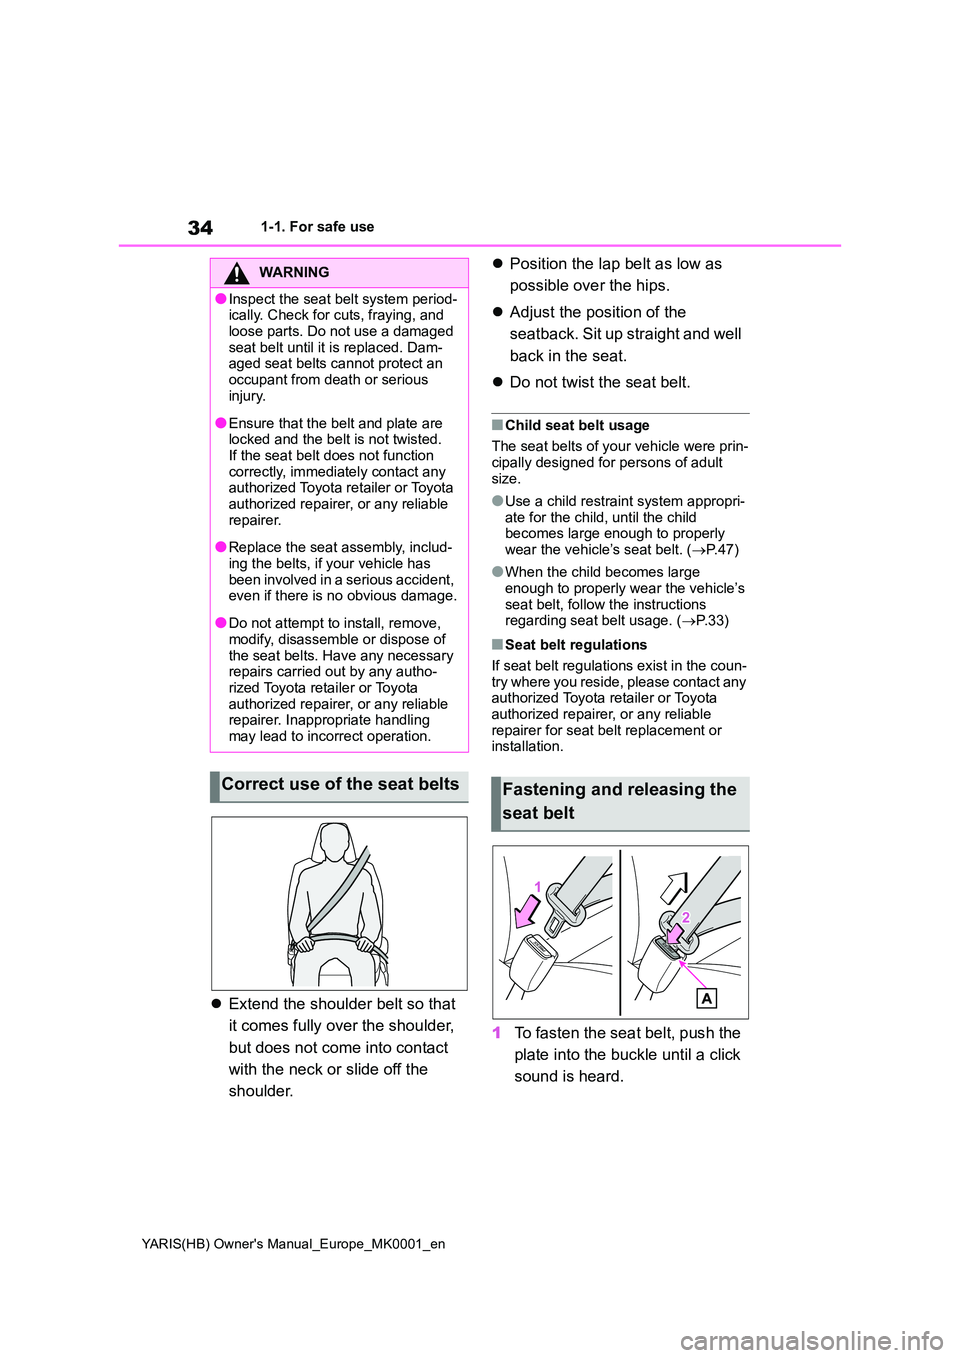 TOYOTA YARIS 2021  Owners Manual 34
YARIS(HB) Owners Manual_Europe_MK0001_en
1-1. For safe use
�zExtend the shoulder belt so that  
it comes fully over the shoulder,  
but does not come into contact  
with the neck or slide off the 